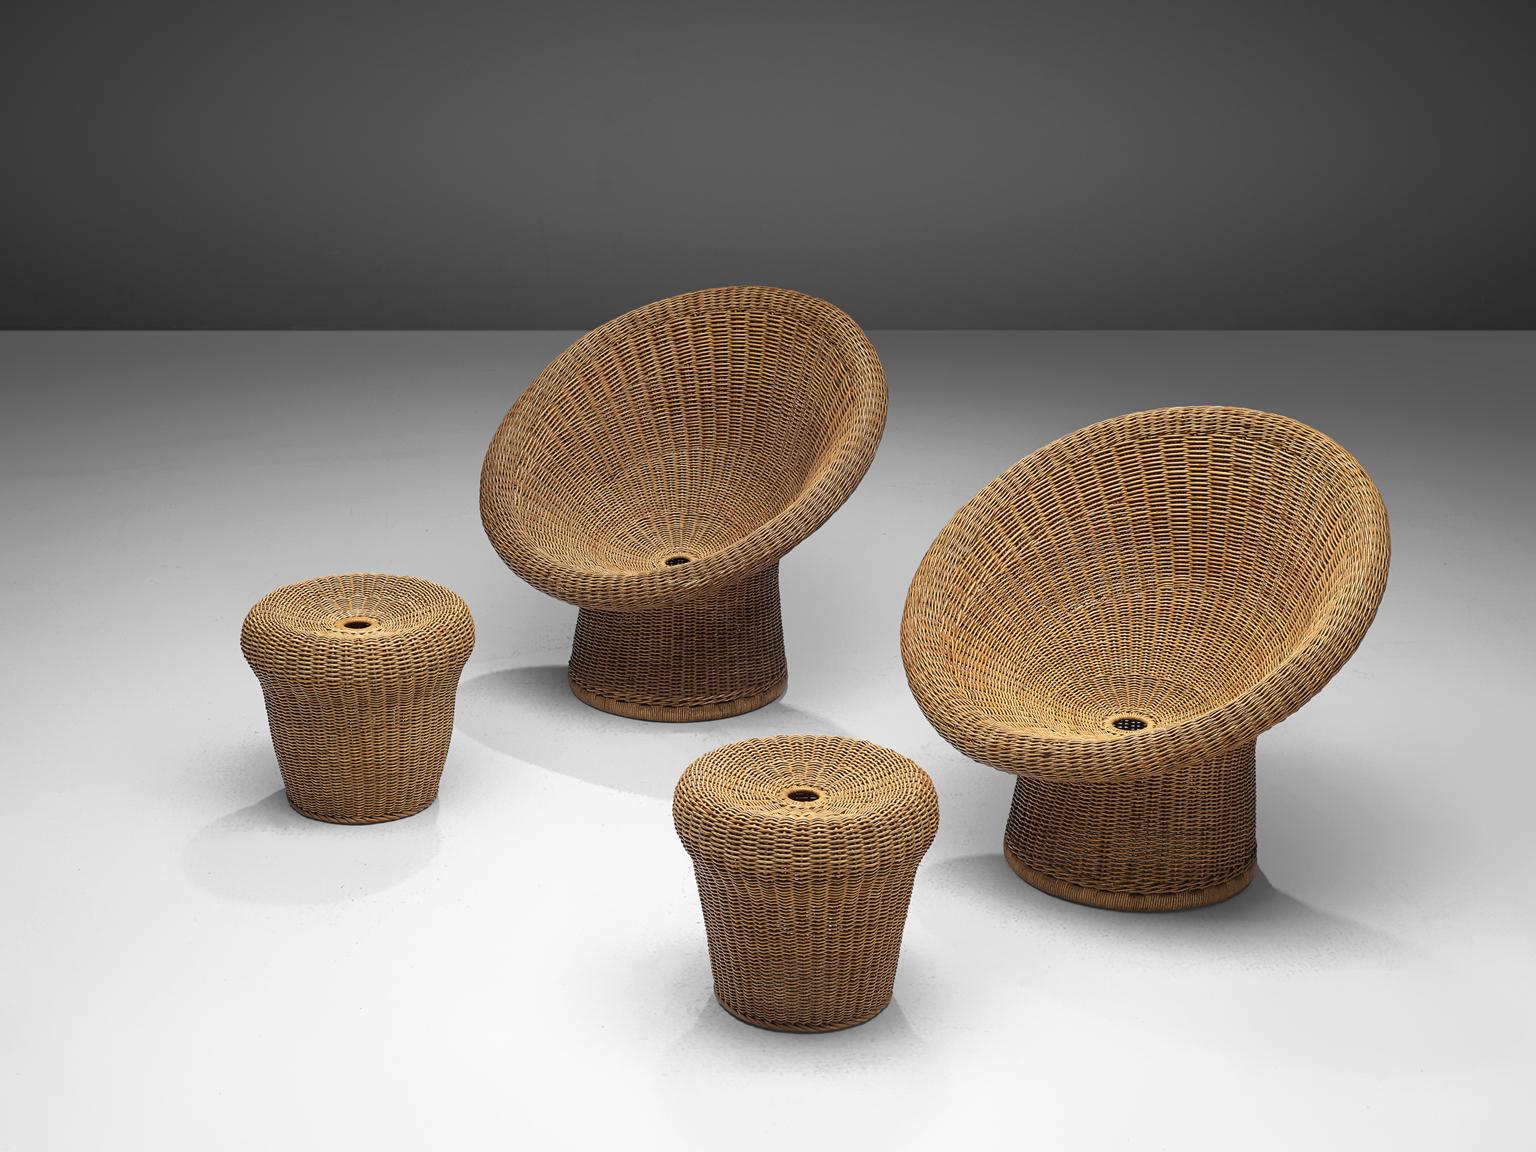 Egon Eiermann, pair of lounge chairs with ottoman E 10, wicker, Germany, design 1952, production 1960s 

Already in the 1940s Eiermann had woven wicker for covering couches and armchairs, but also used it as an architectural element in outdoor